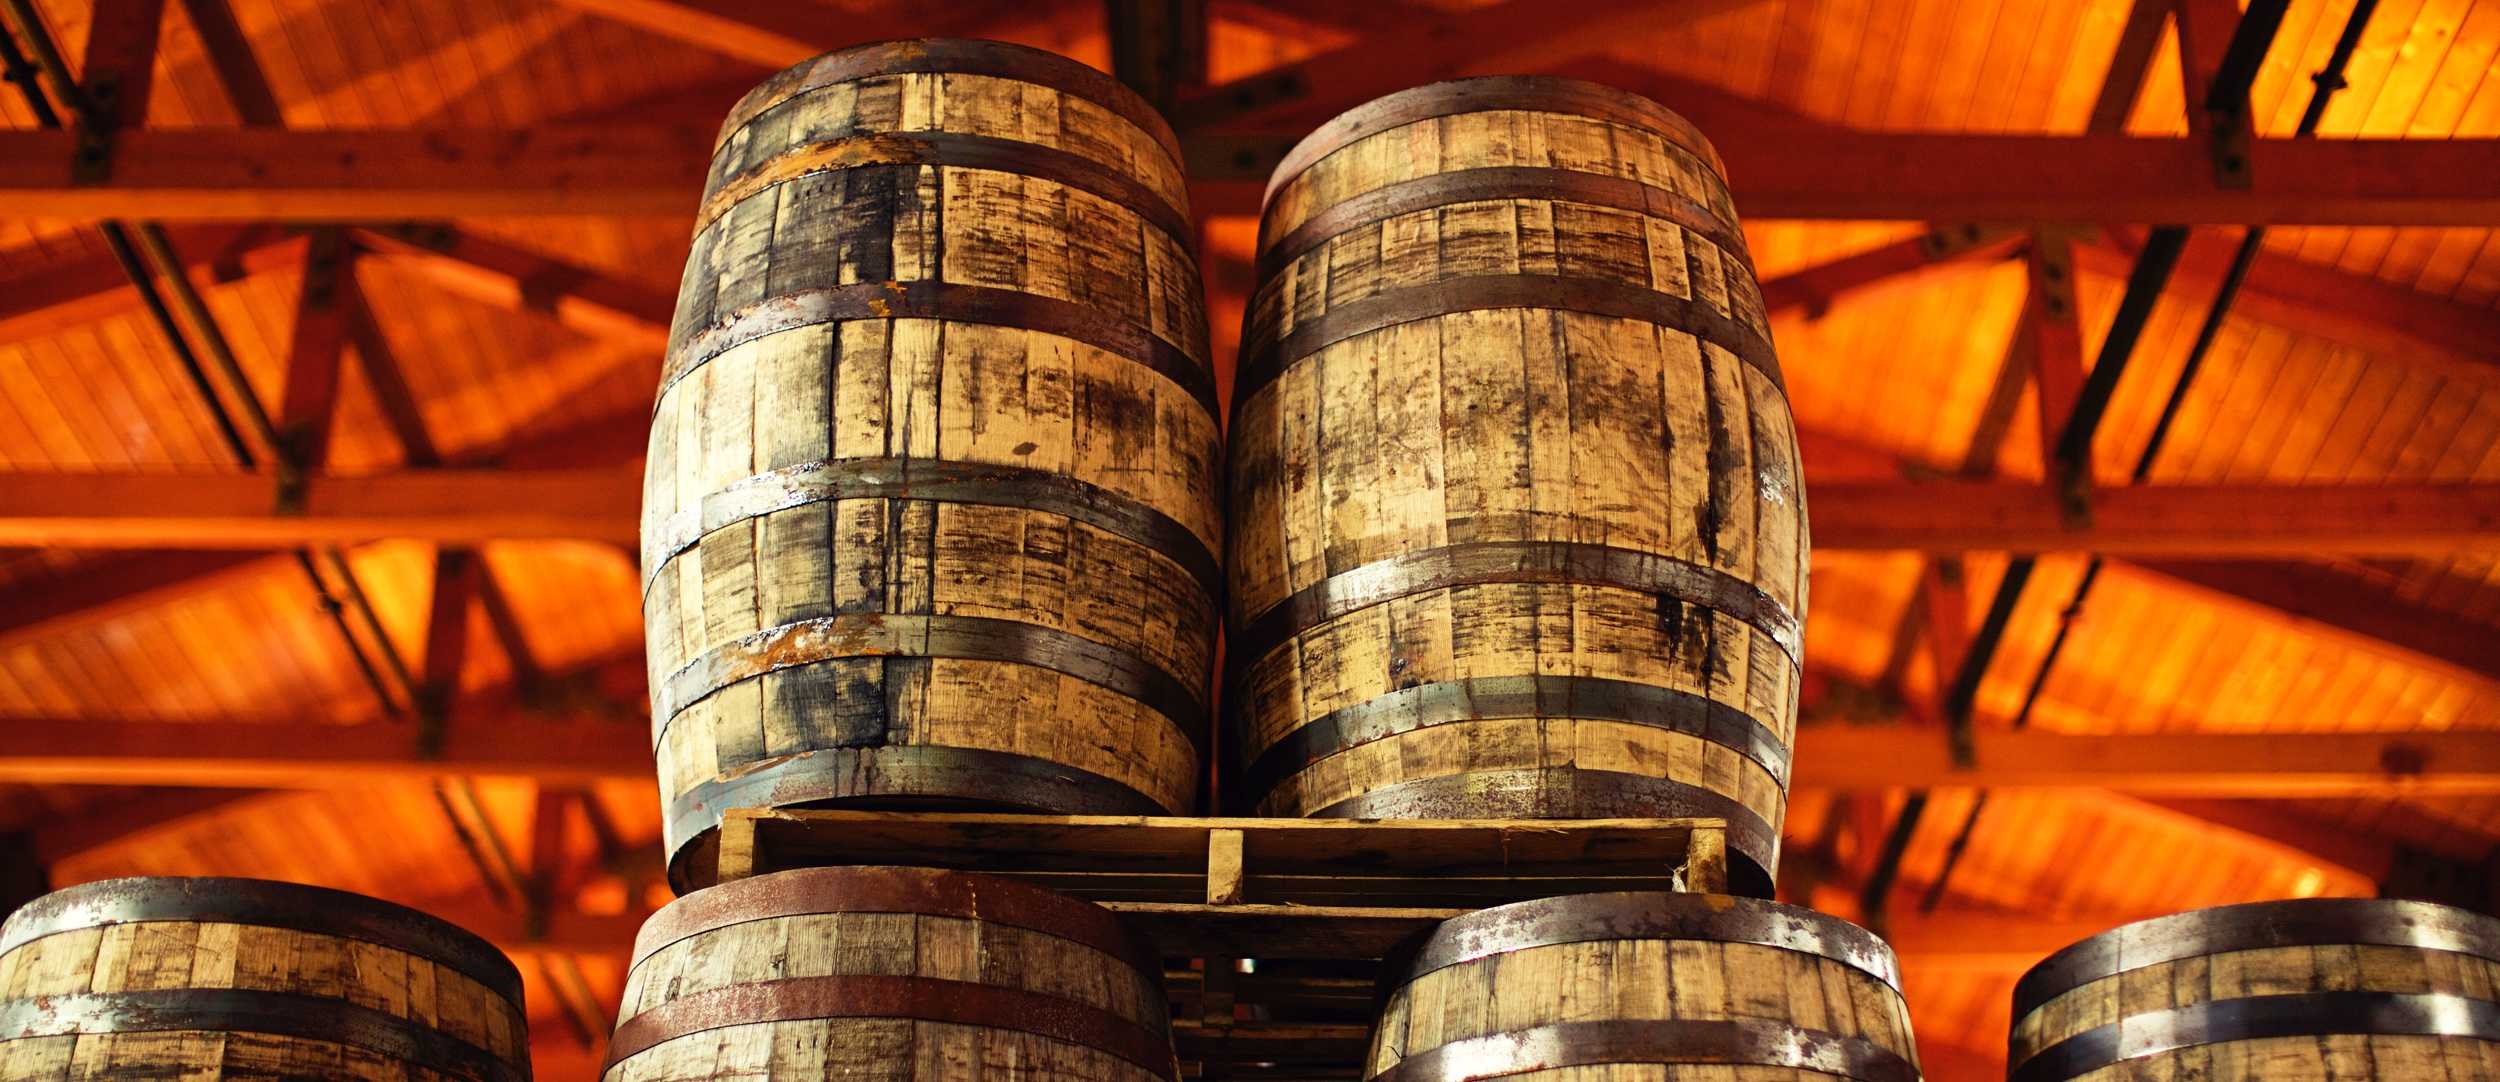 Our whisky is aged in white oak bourbon barrels